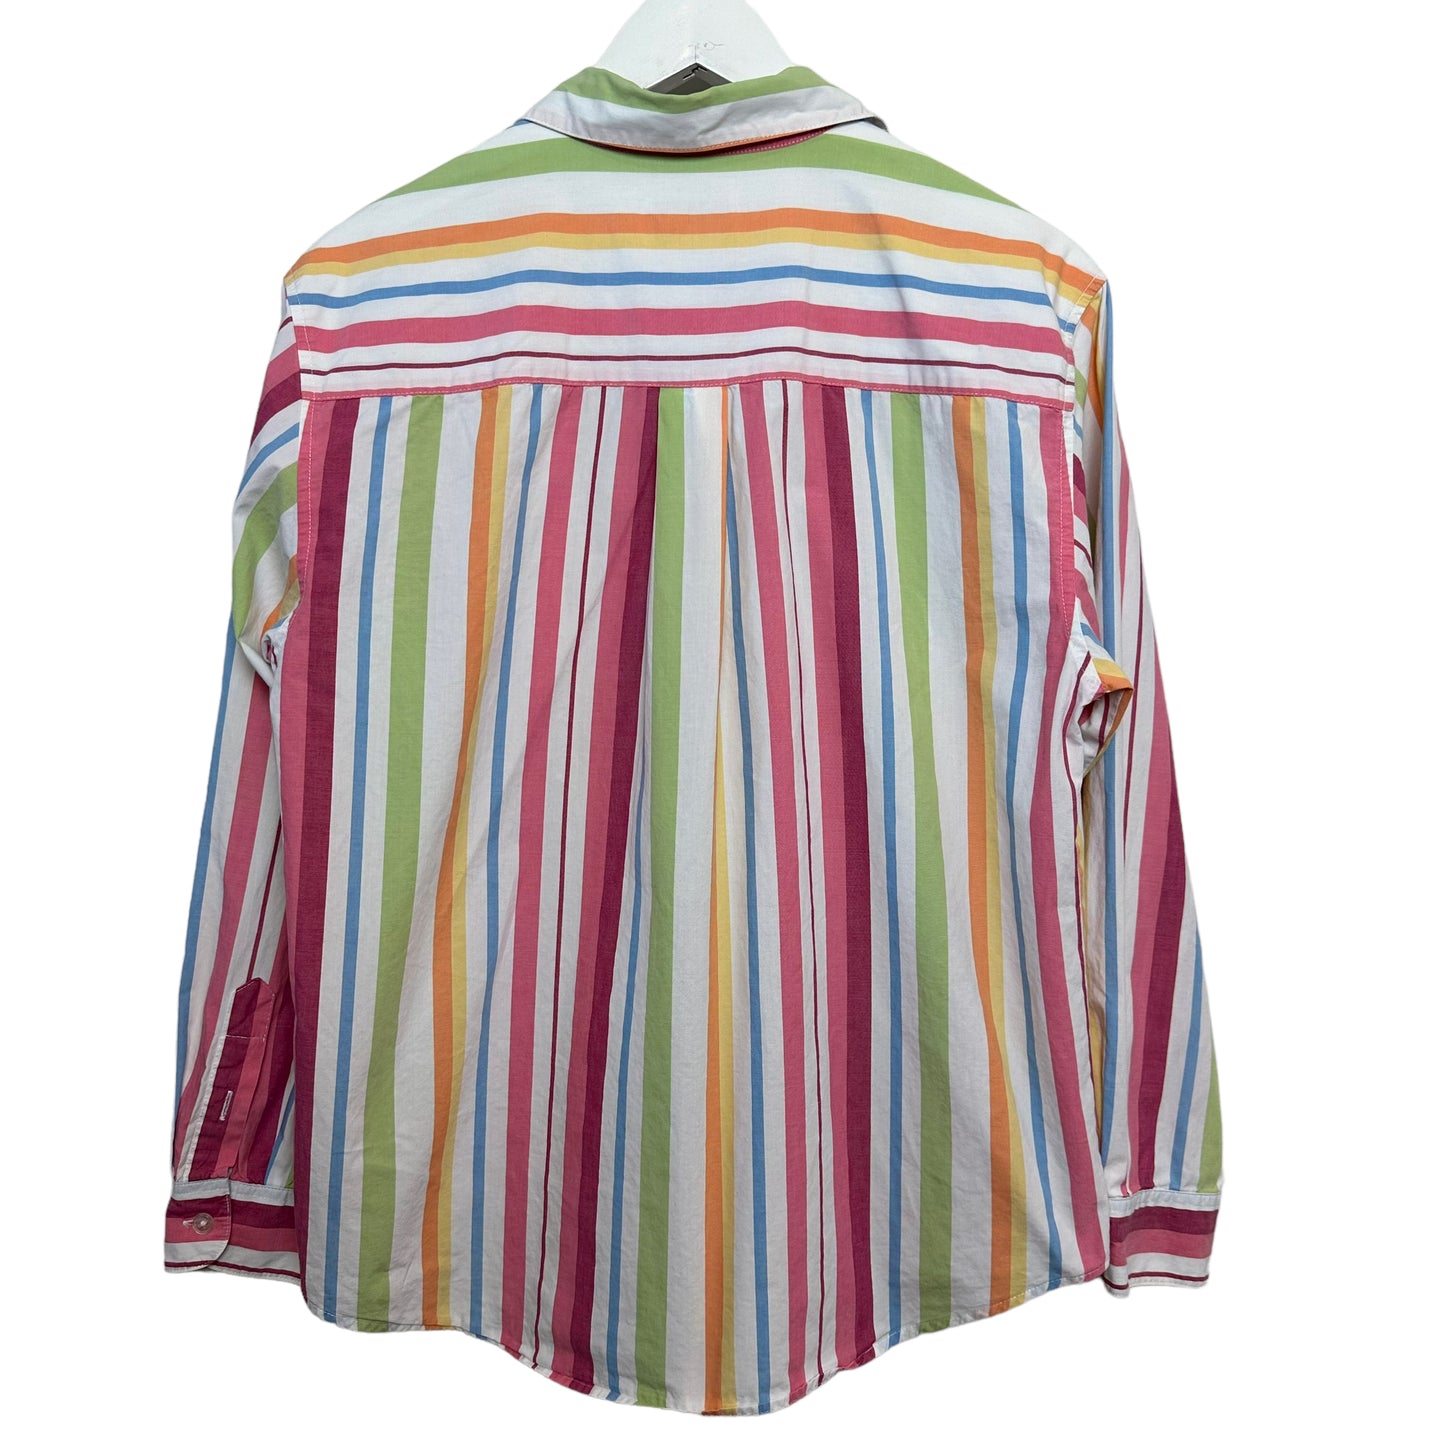 Vintage 90s Talbots Colorful Striped Button Up Collared Shirt Cotton Medium Petite